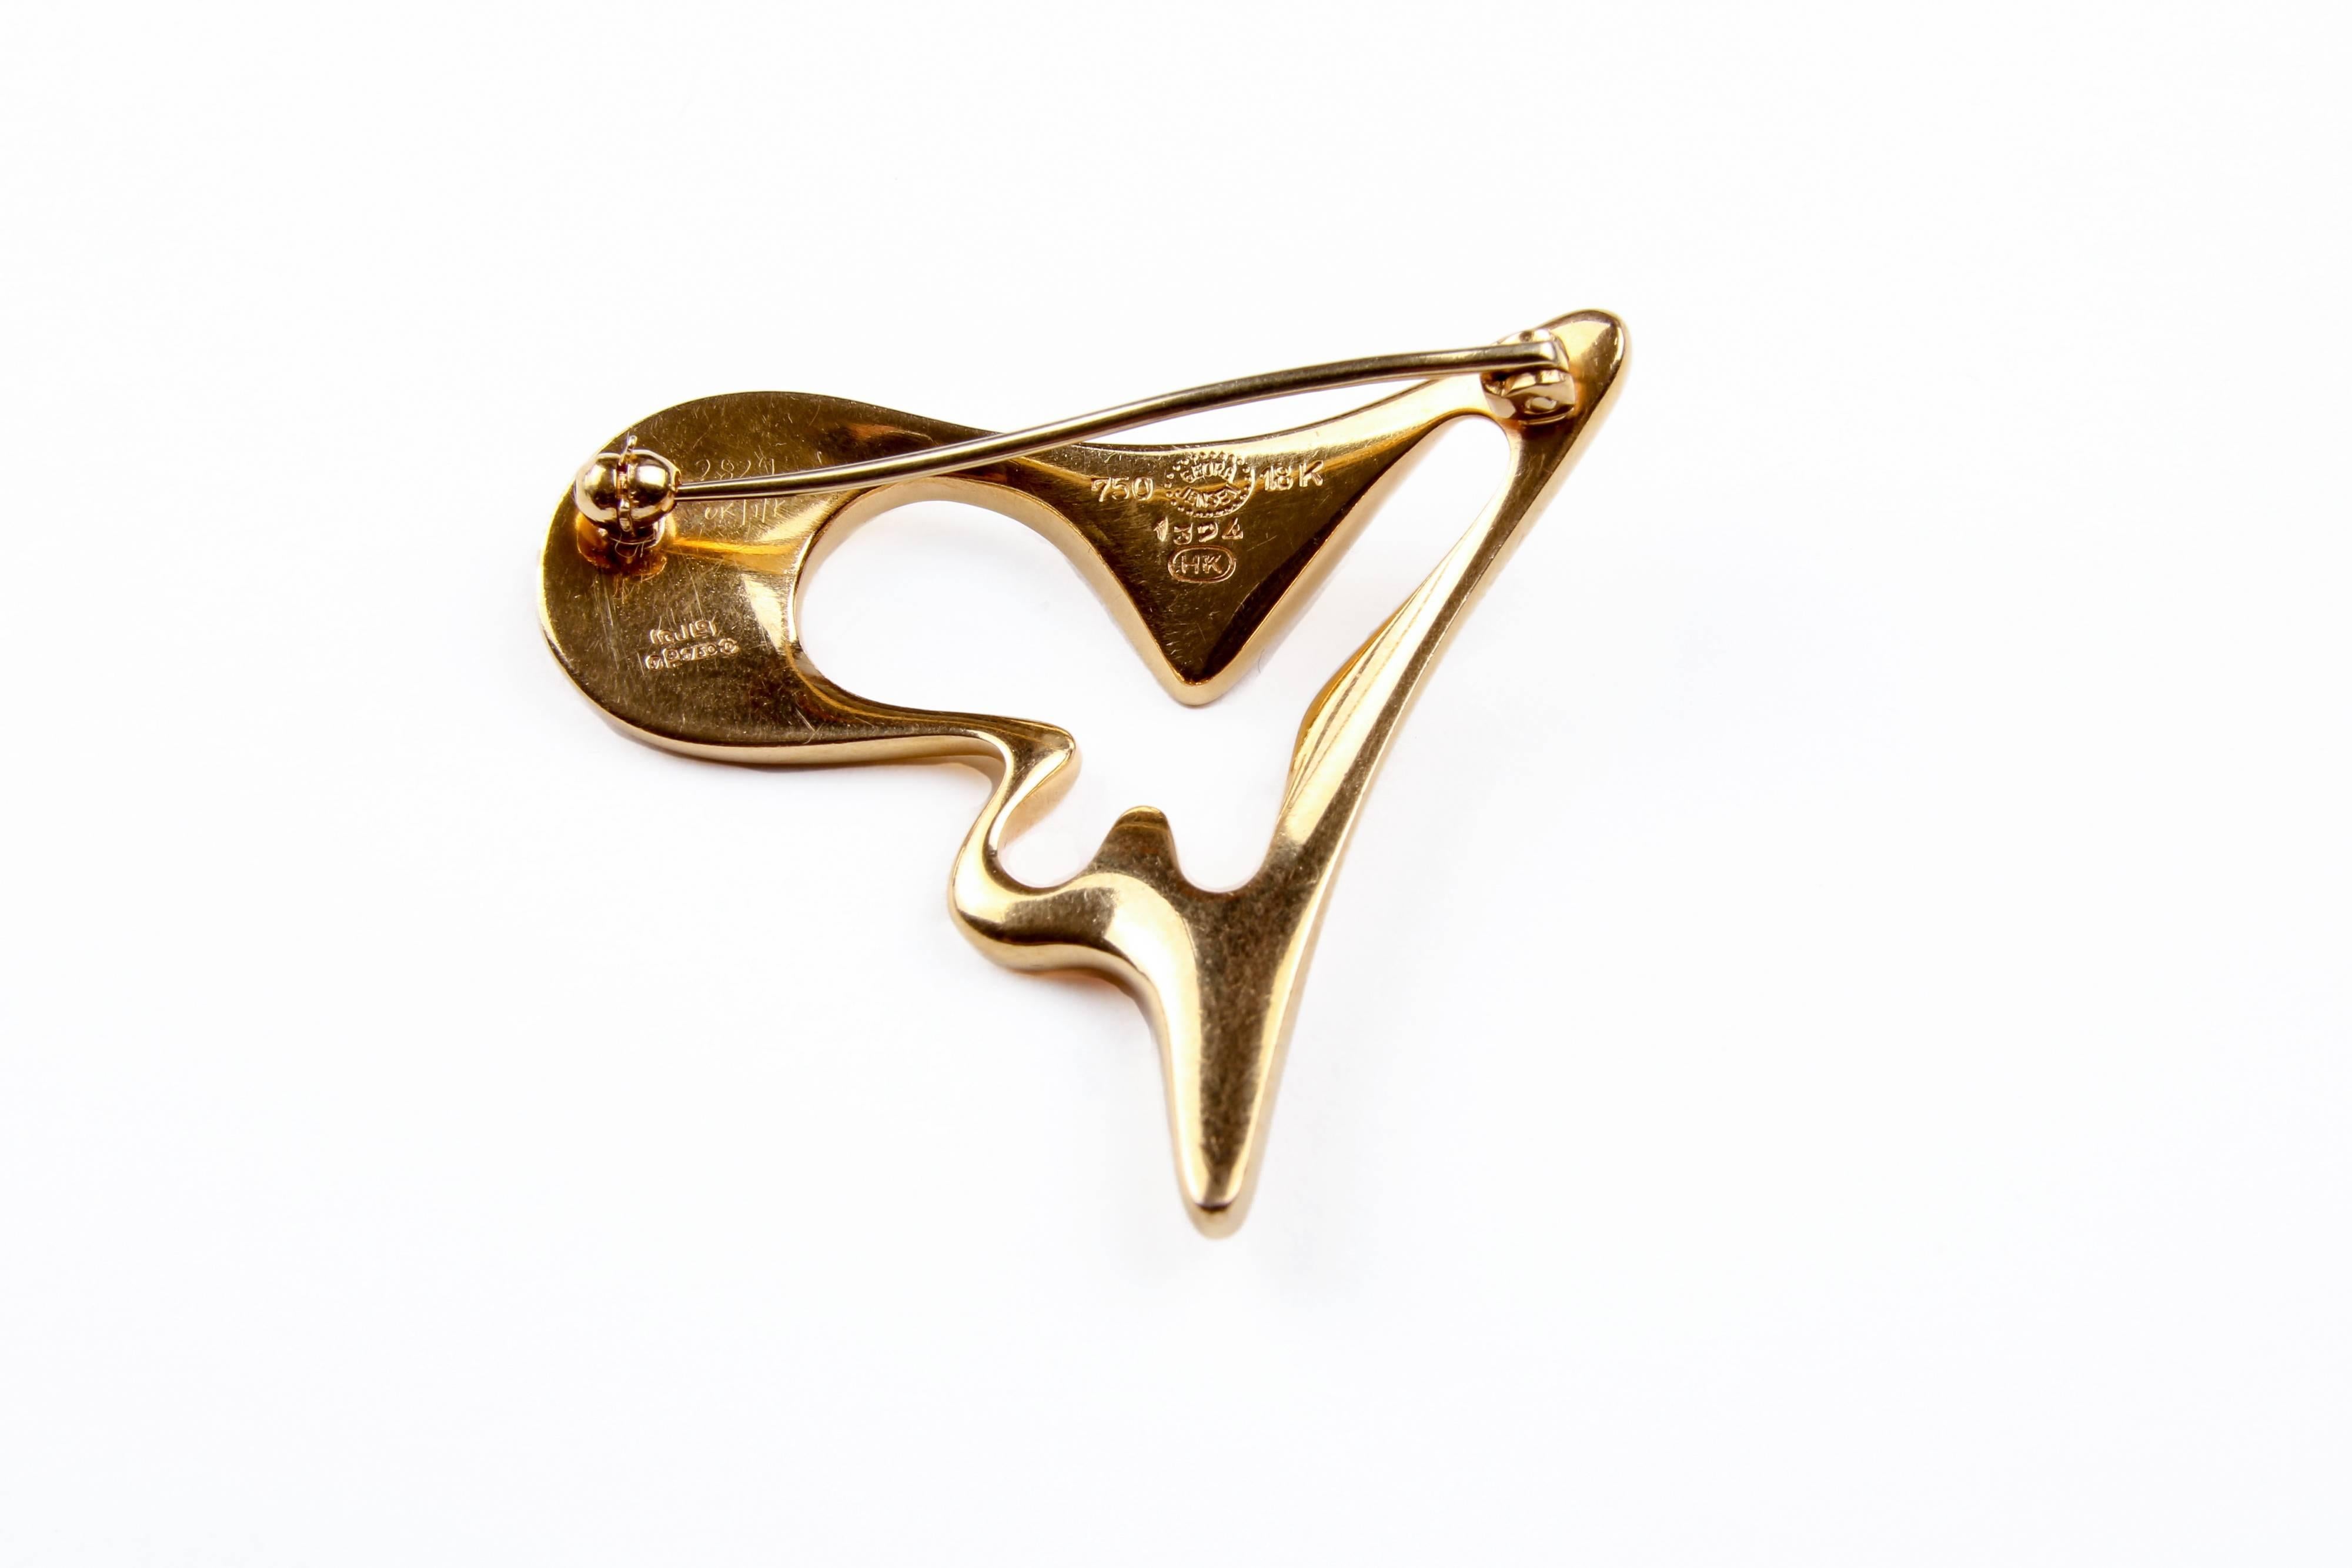 A rare Georg Jensen 18carat gold Splash brooch by Henning Koppel. This is designed as a shaped abstract with an open centre. Signed Georg Jensen 1324 750 18K. import mark for London, 1983. Length 4.1cms. Weight 15.8 gms. The brooch closes with a